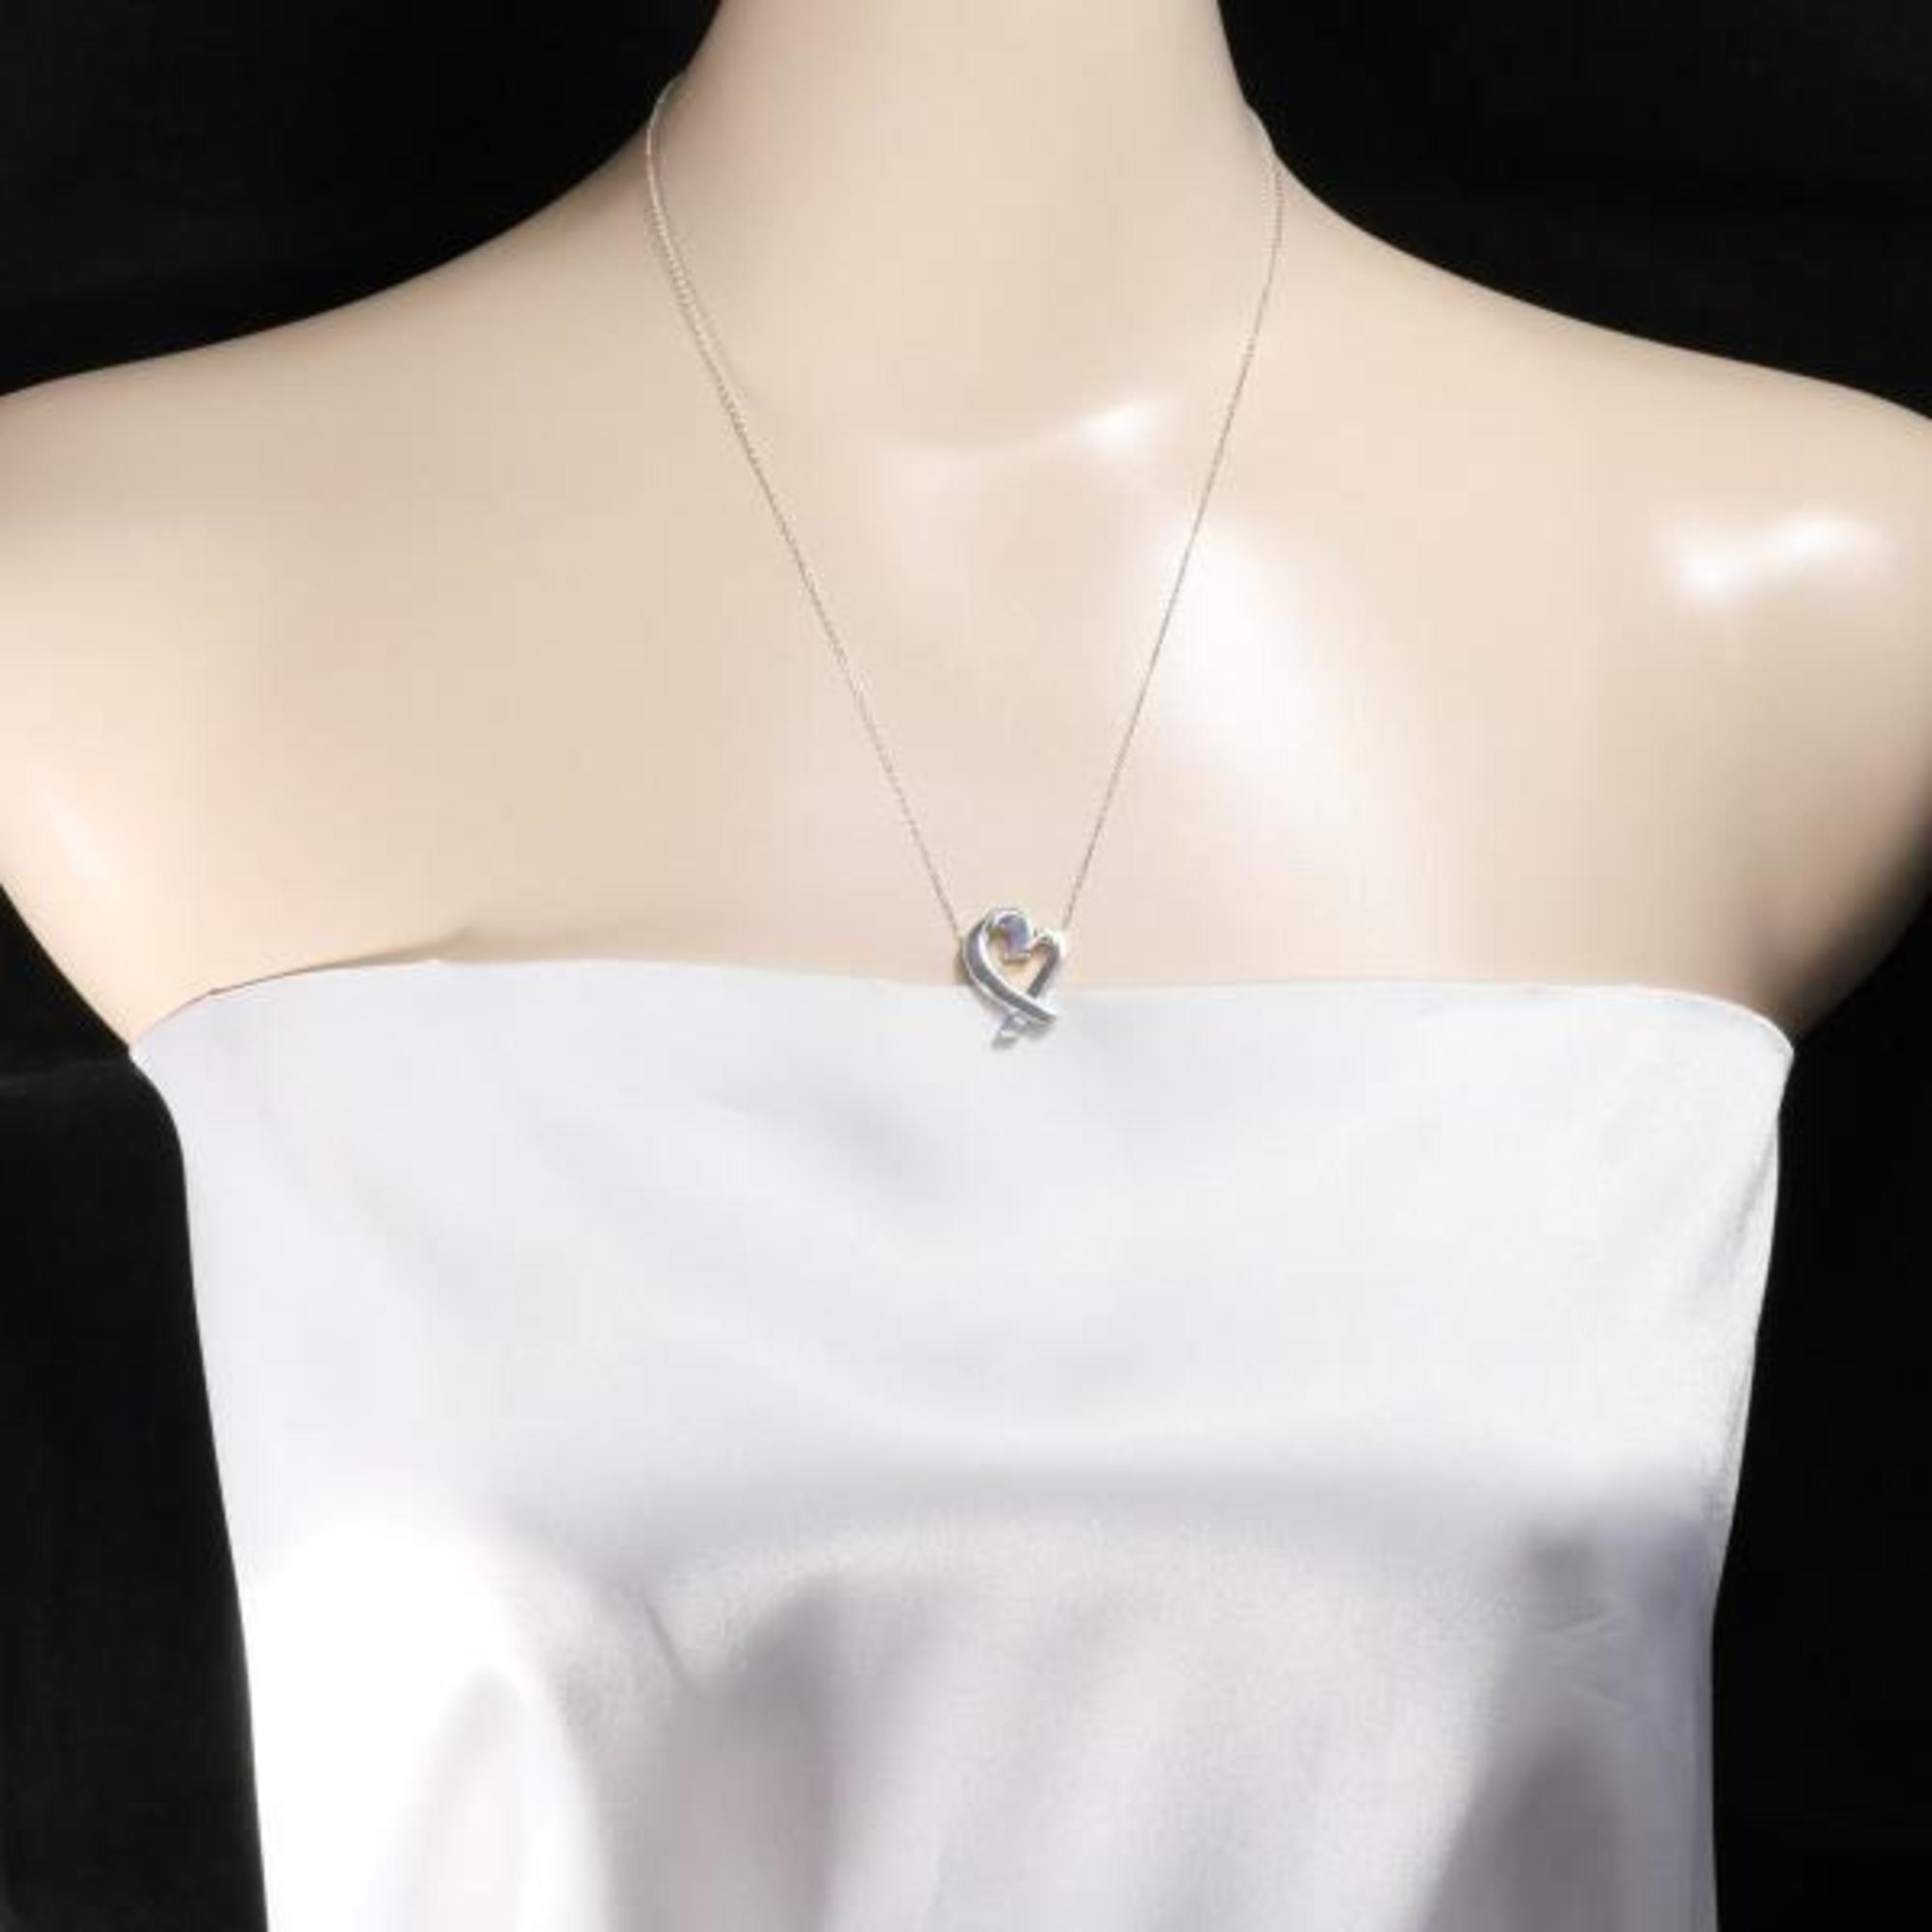 Tiffany Loving Heart Silver Necklace Box Bag Total weight approx. 5.1g 48cm